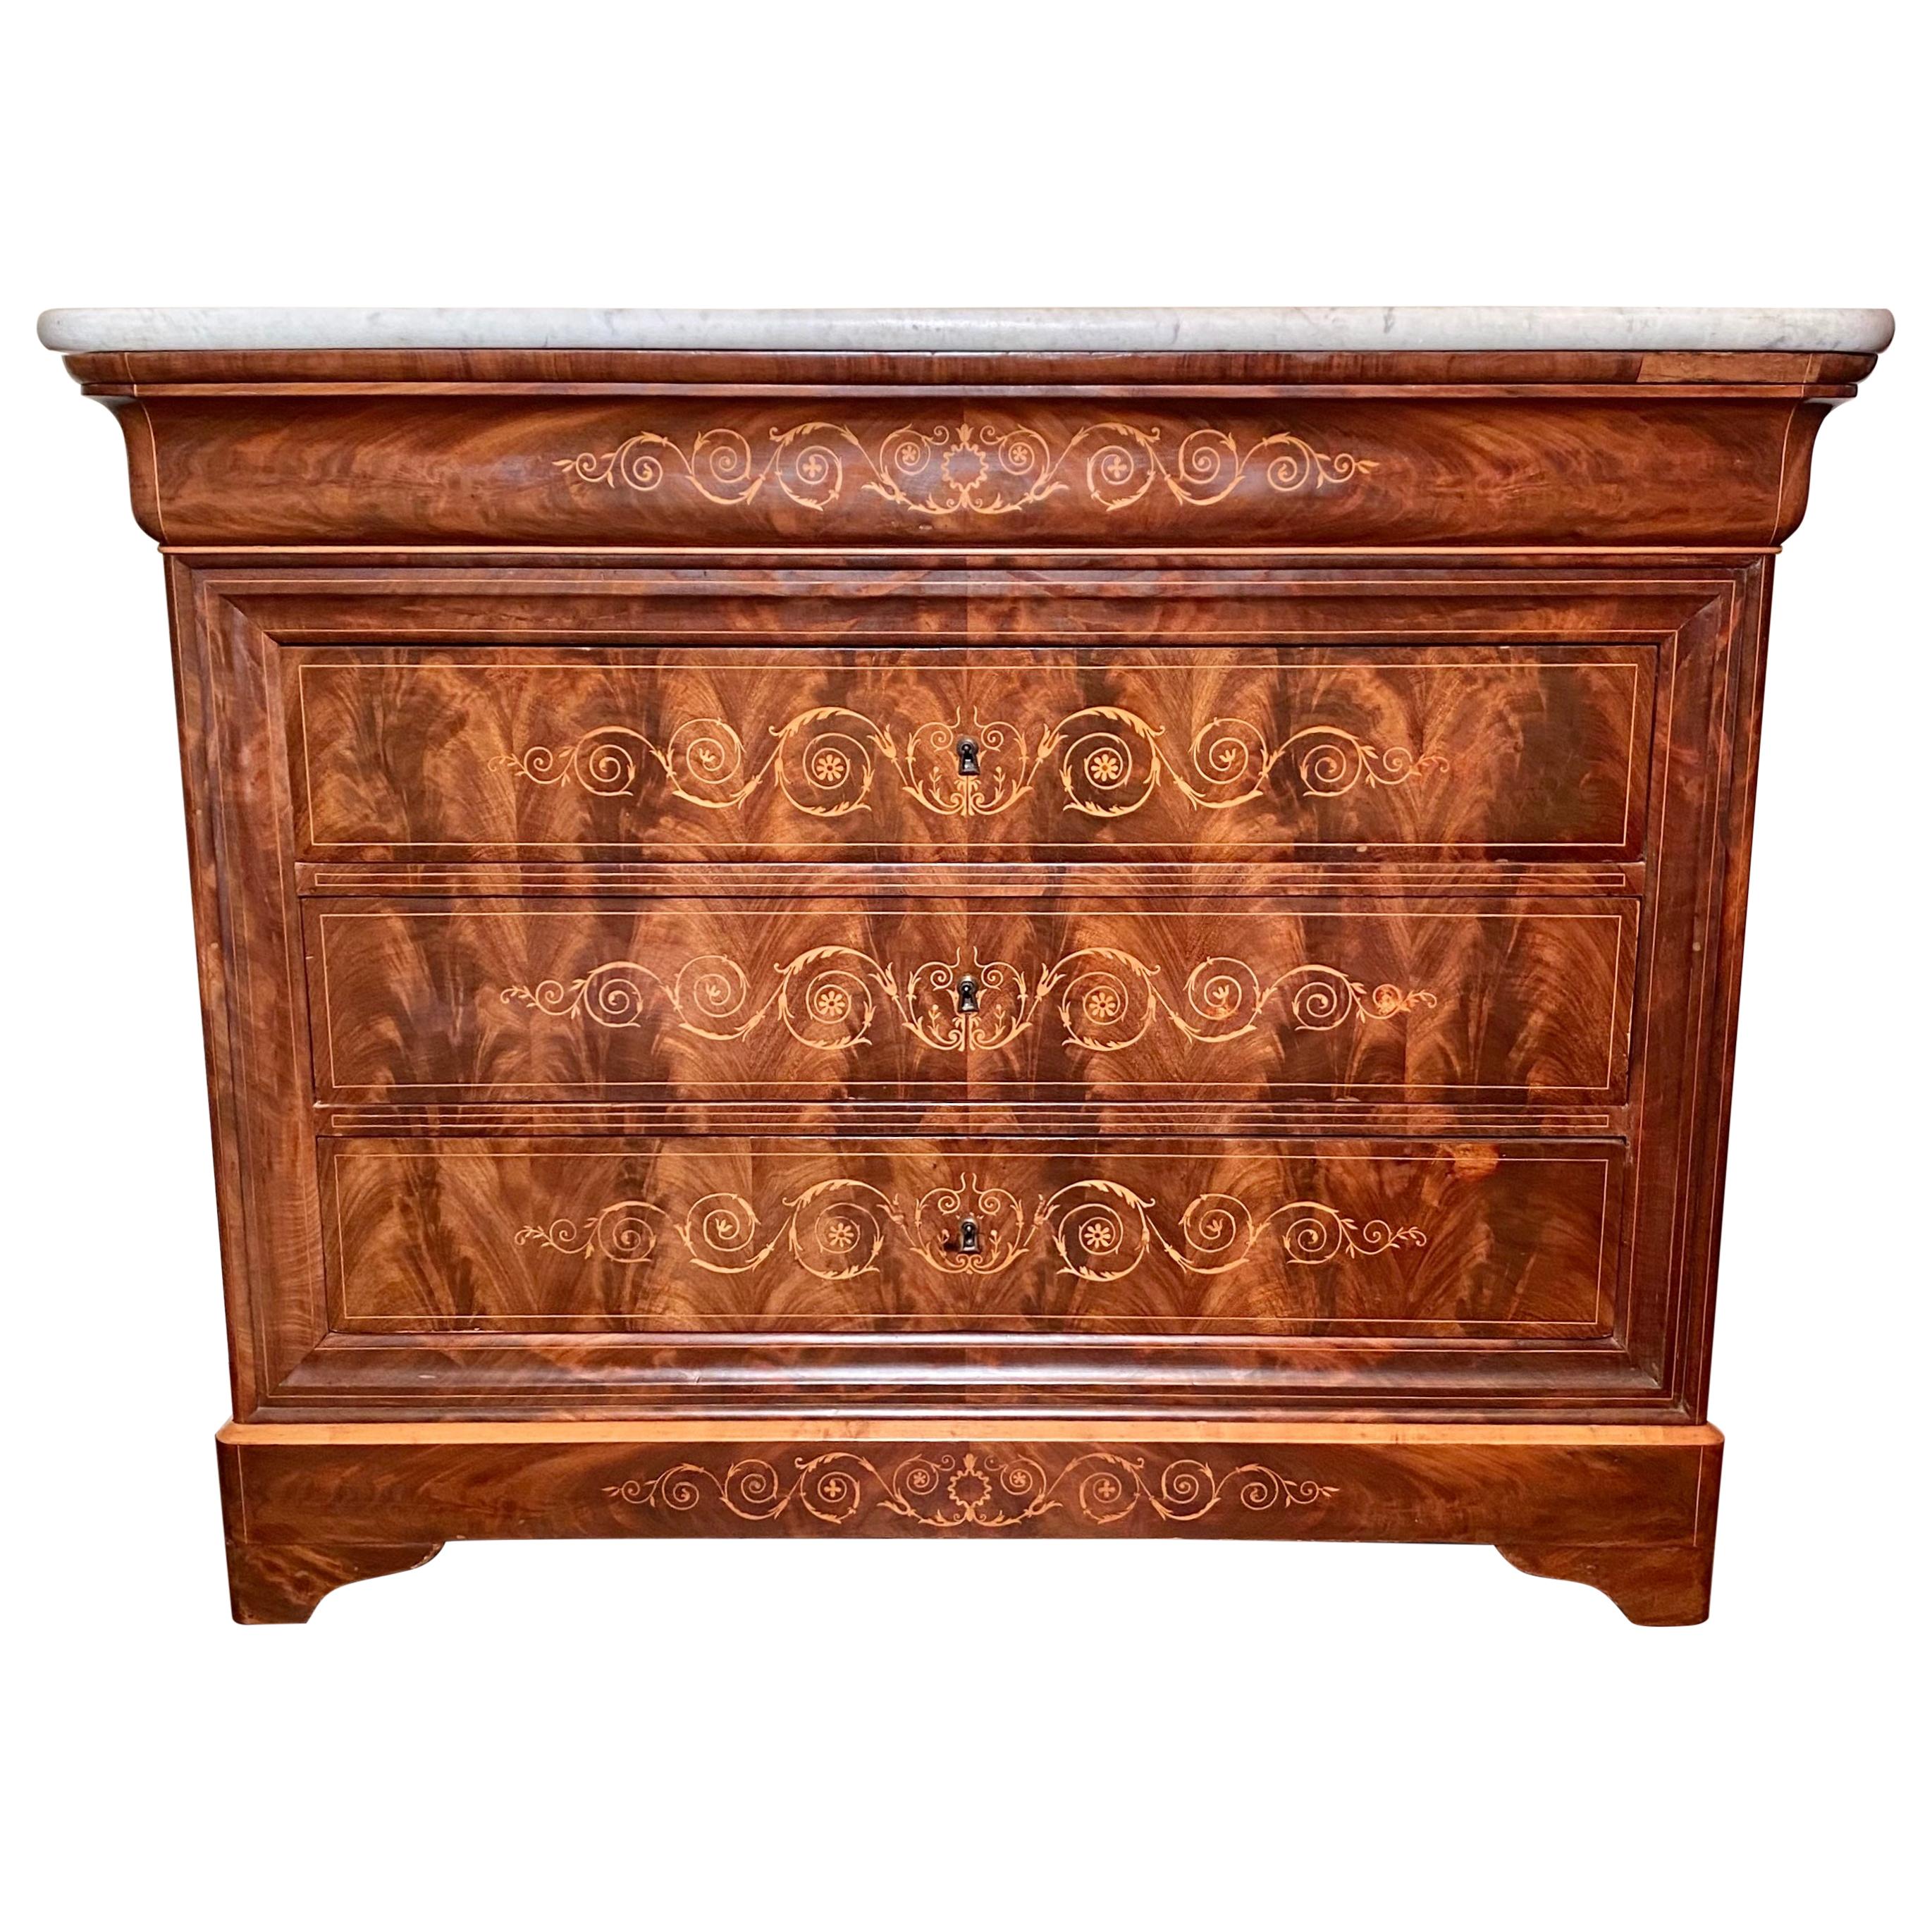 Antique French Inlaid Charles X Commode, circa 1830-1840